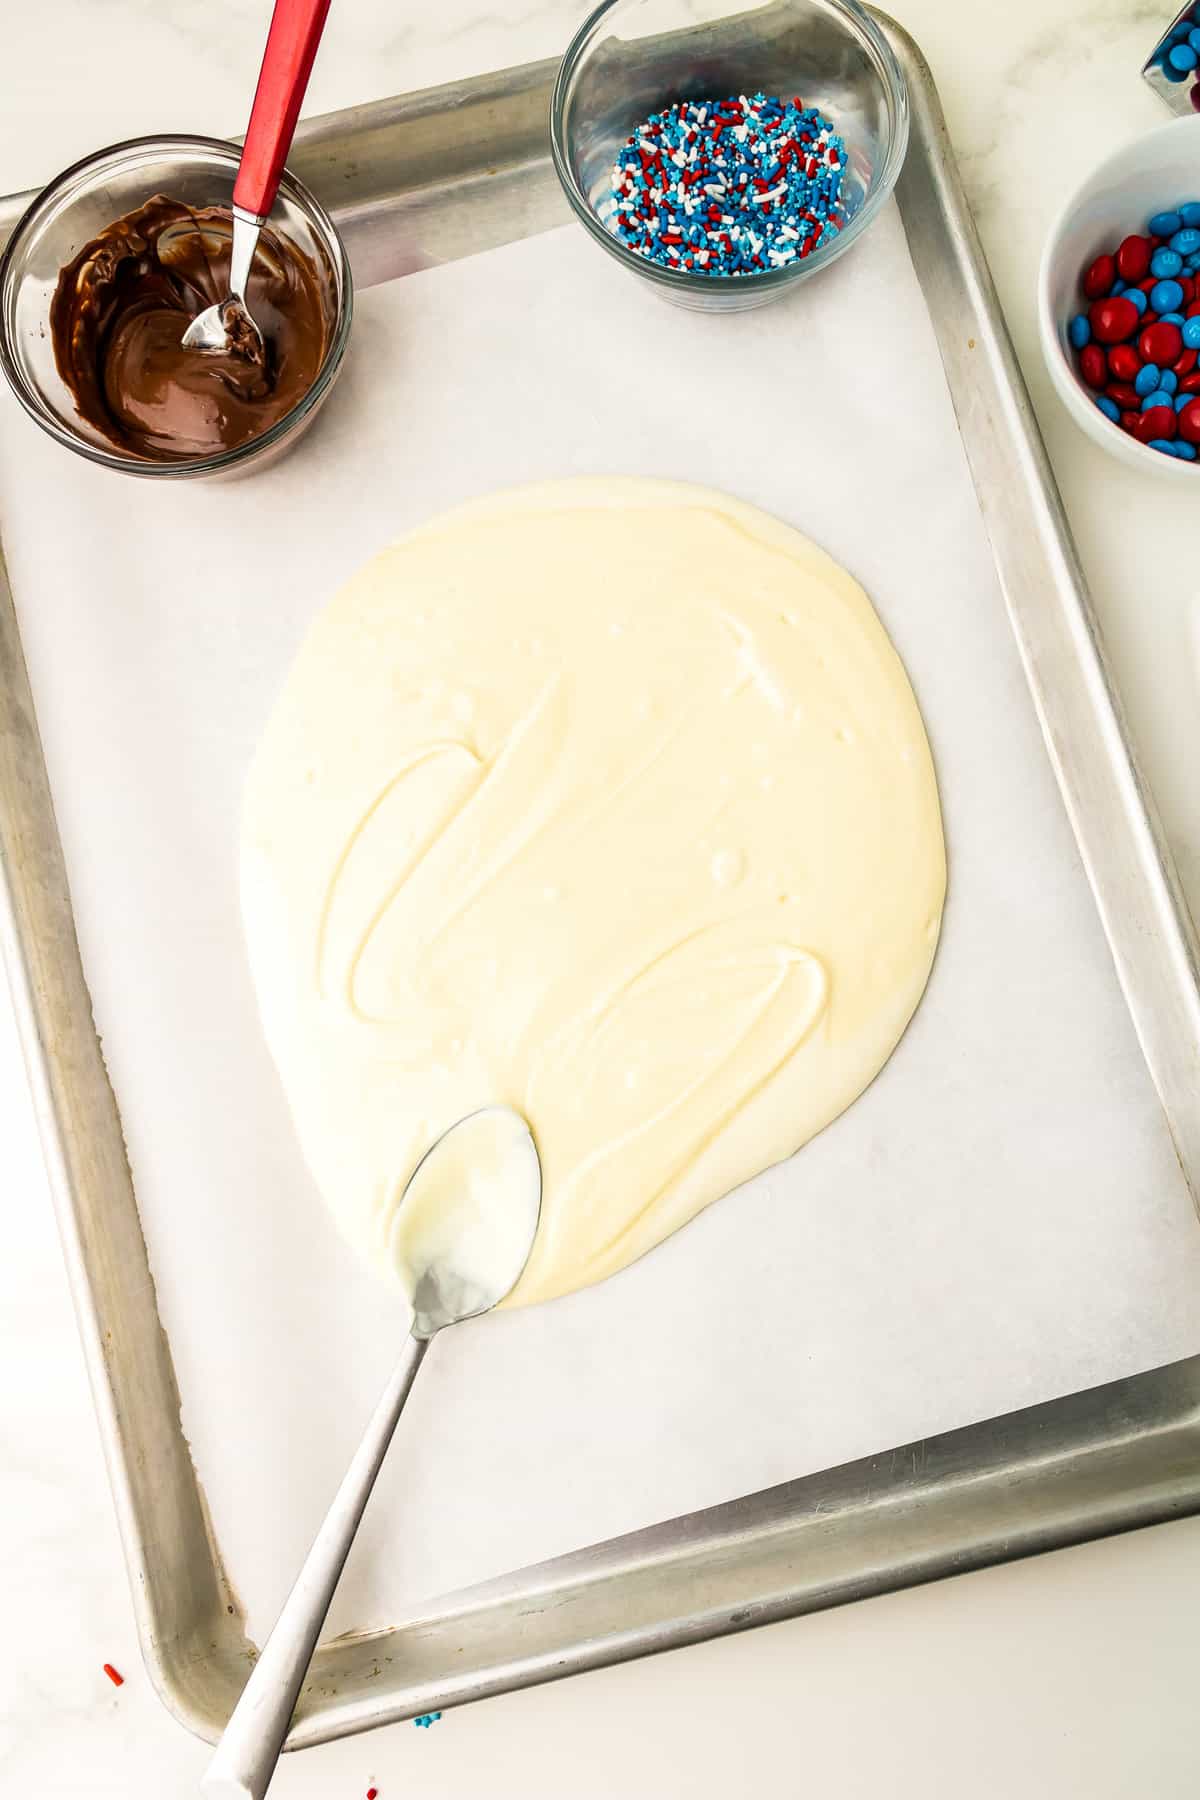 Pour White Chocolate onto a pan with Parchment Paper and spread out.